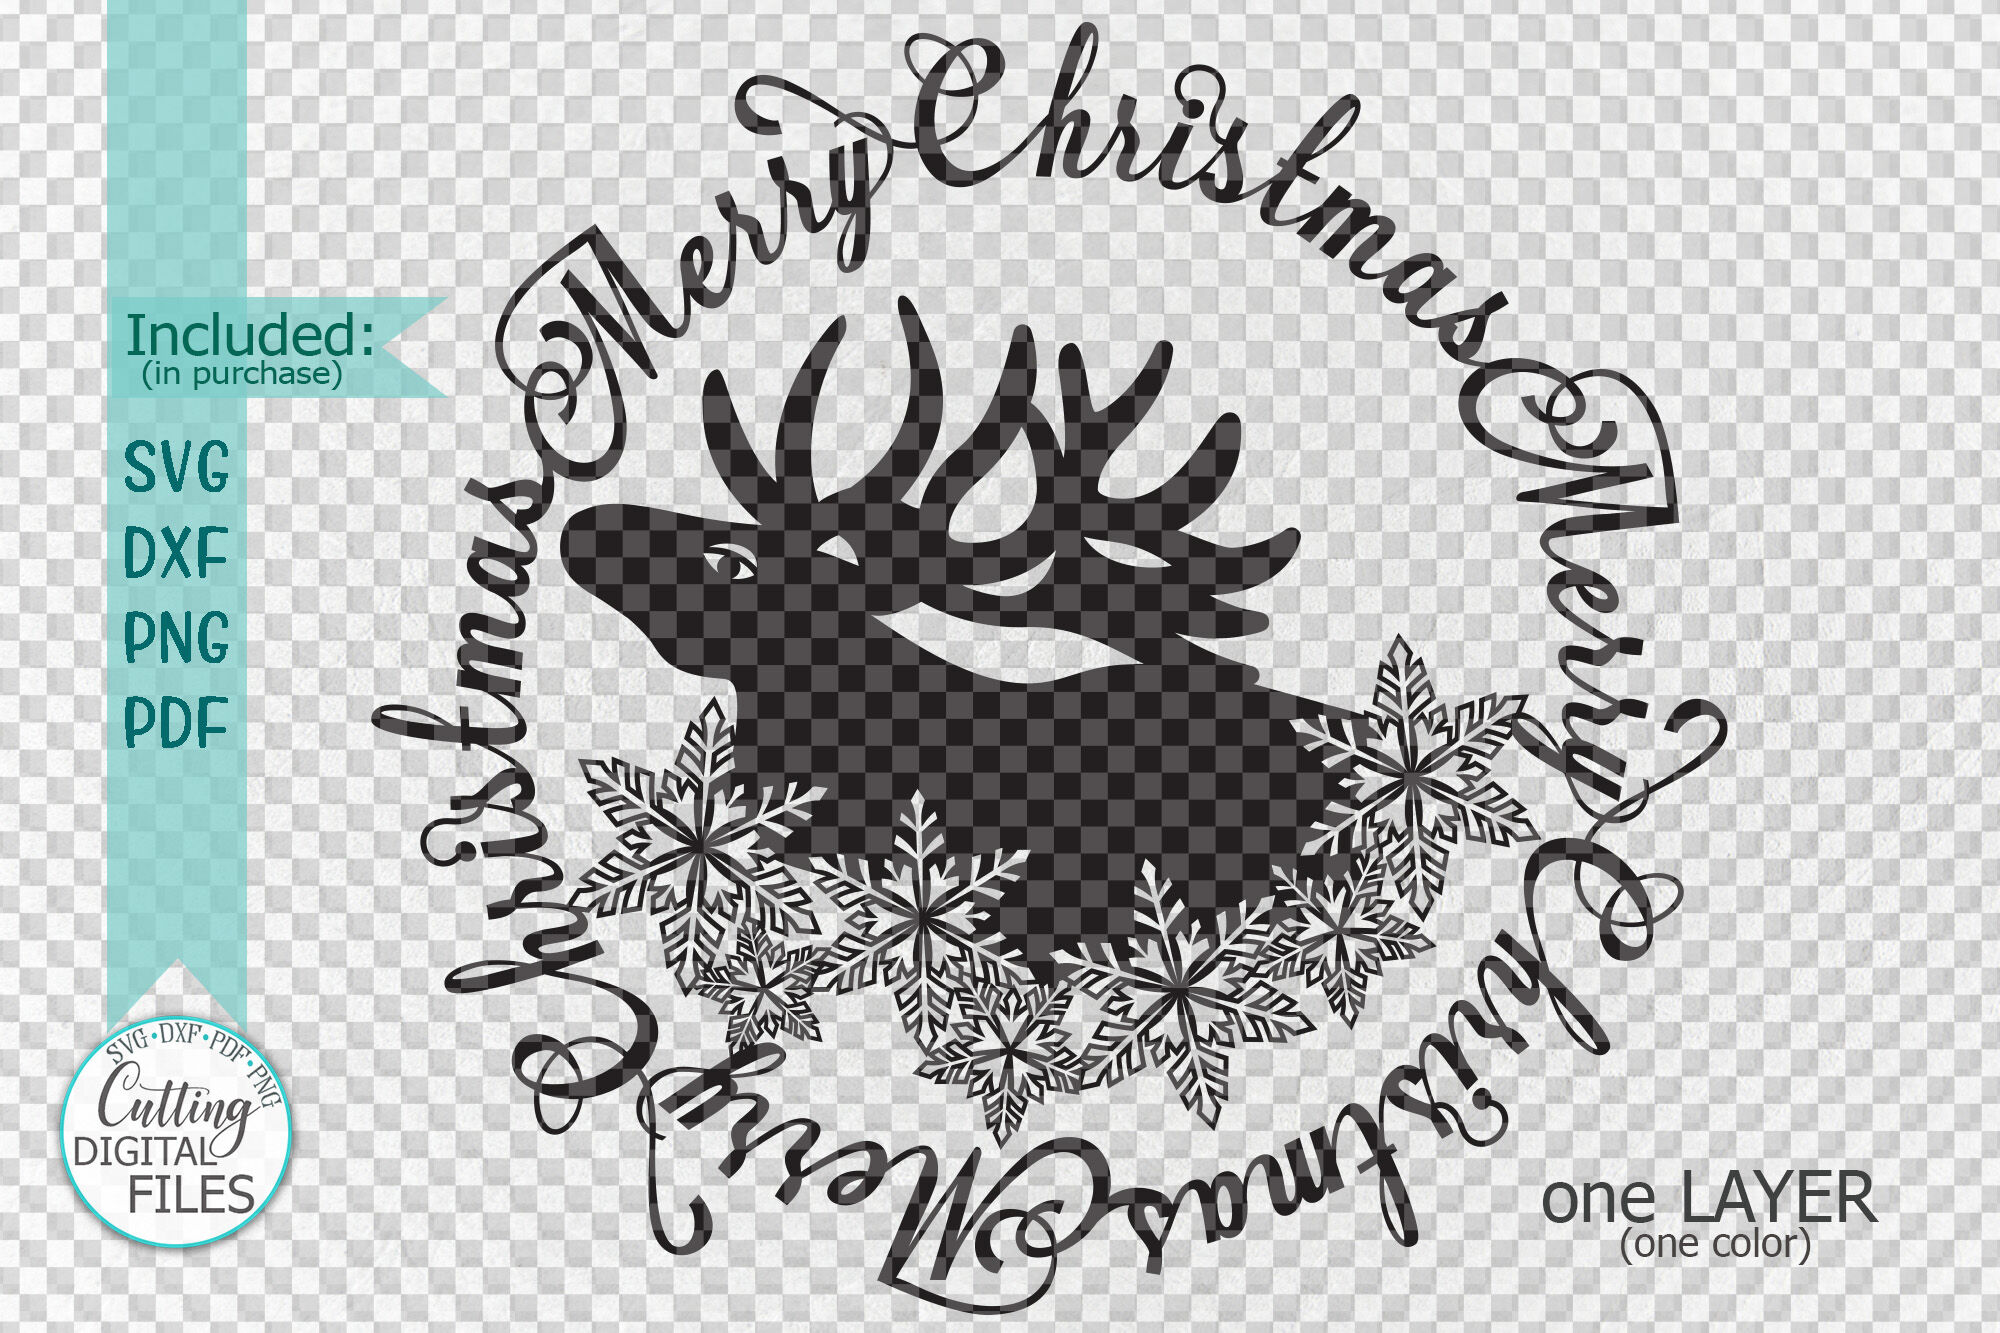 Merry Christmas Moose Snowflakes circle framed svg cut out file By